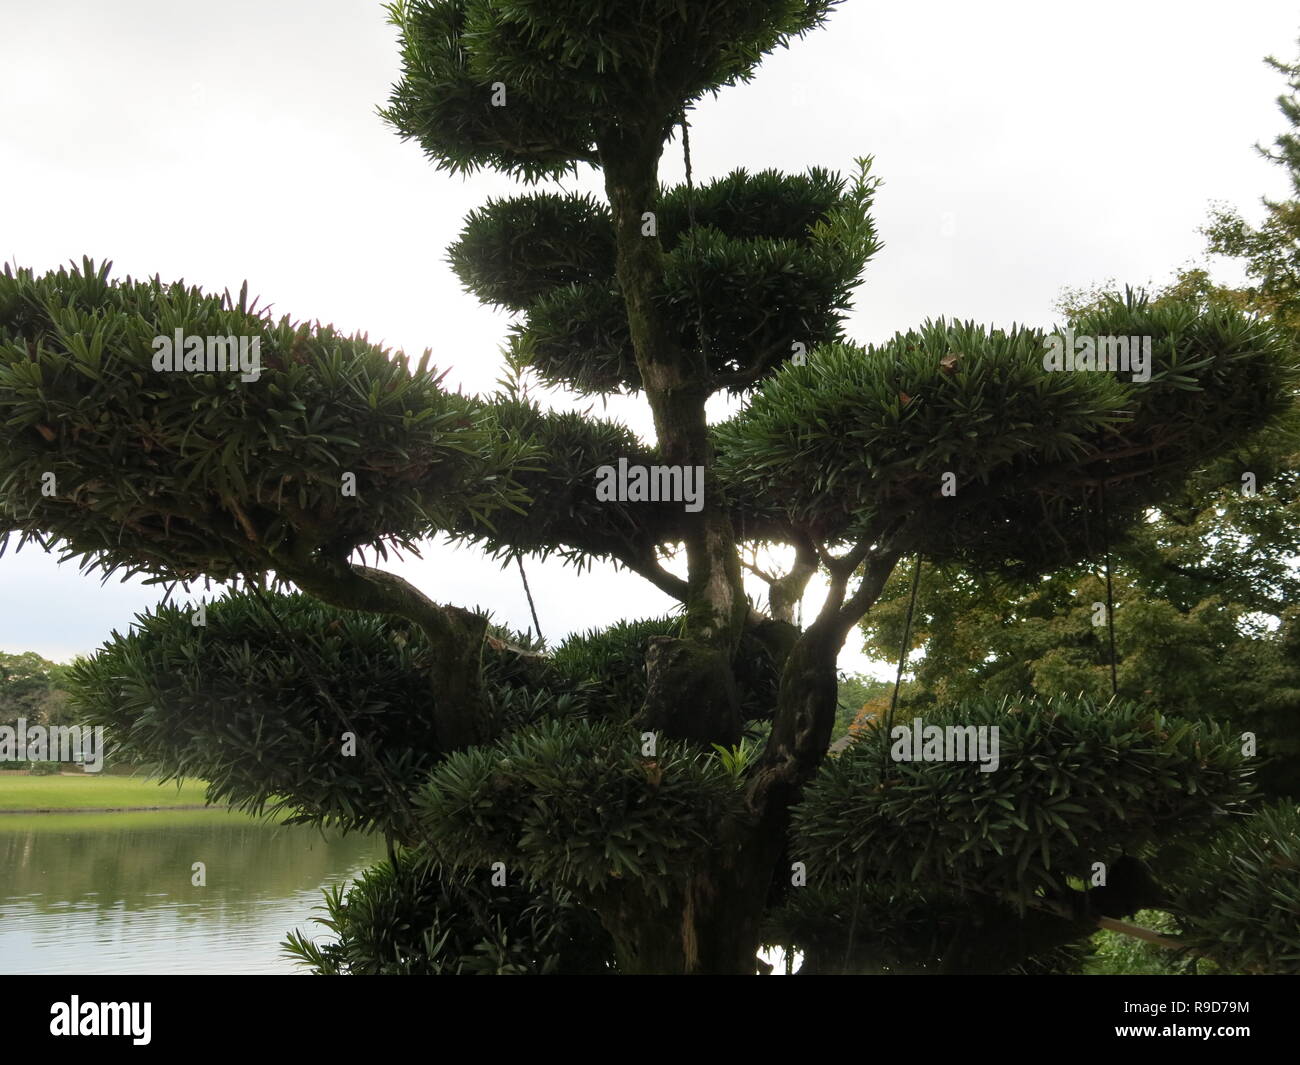 Close-up of a pine tree with typical Japanese 'cloud' pruning; Korakuen Garden, one of the Three Great Gardens of Japan; October 2018 Stock Photo